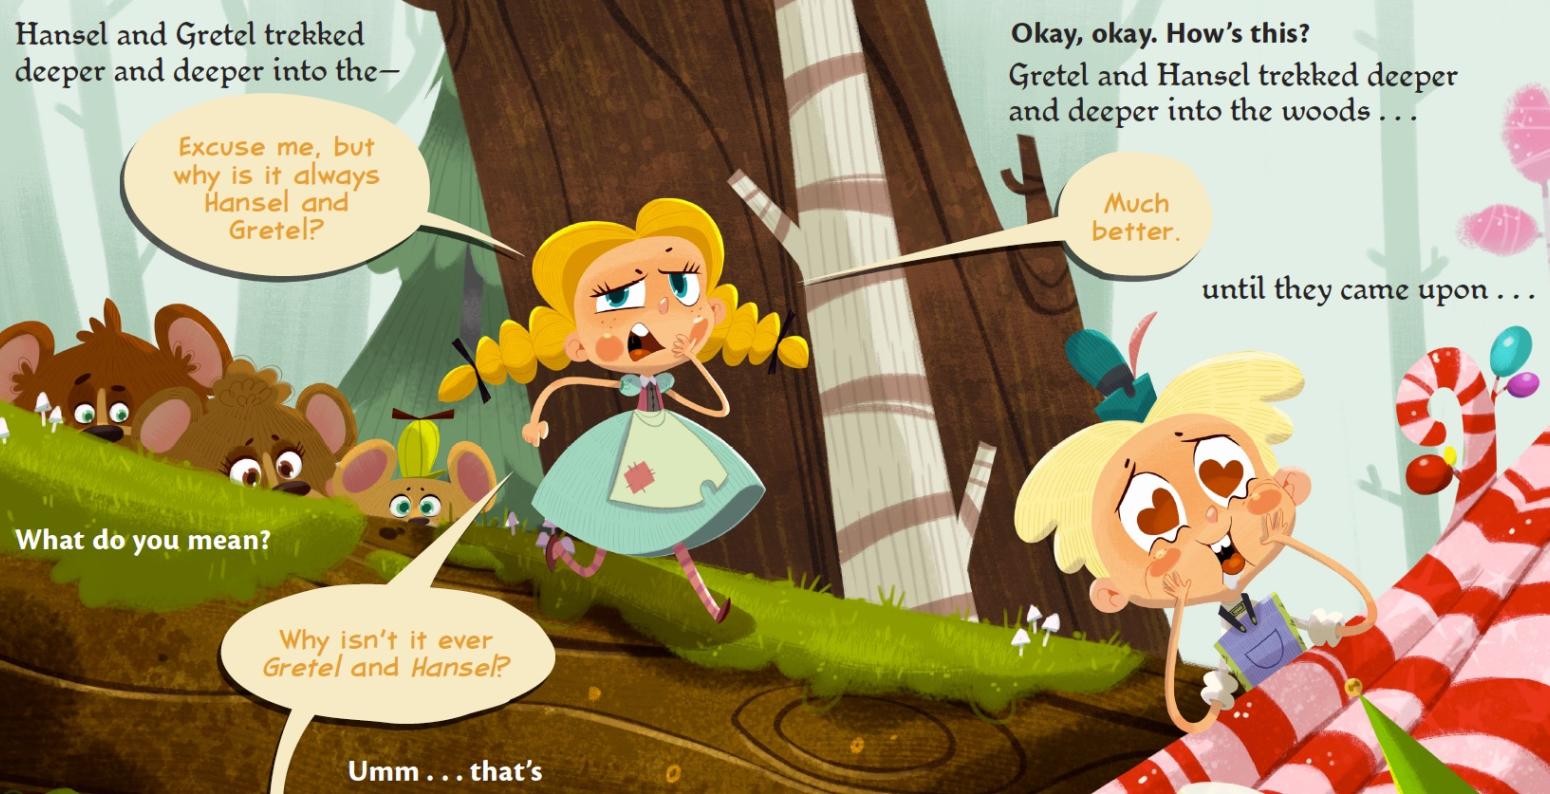 Illustration featuring Hansel and Gretel walking through the woods.